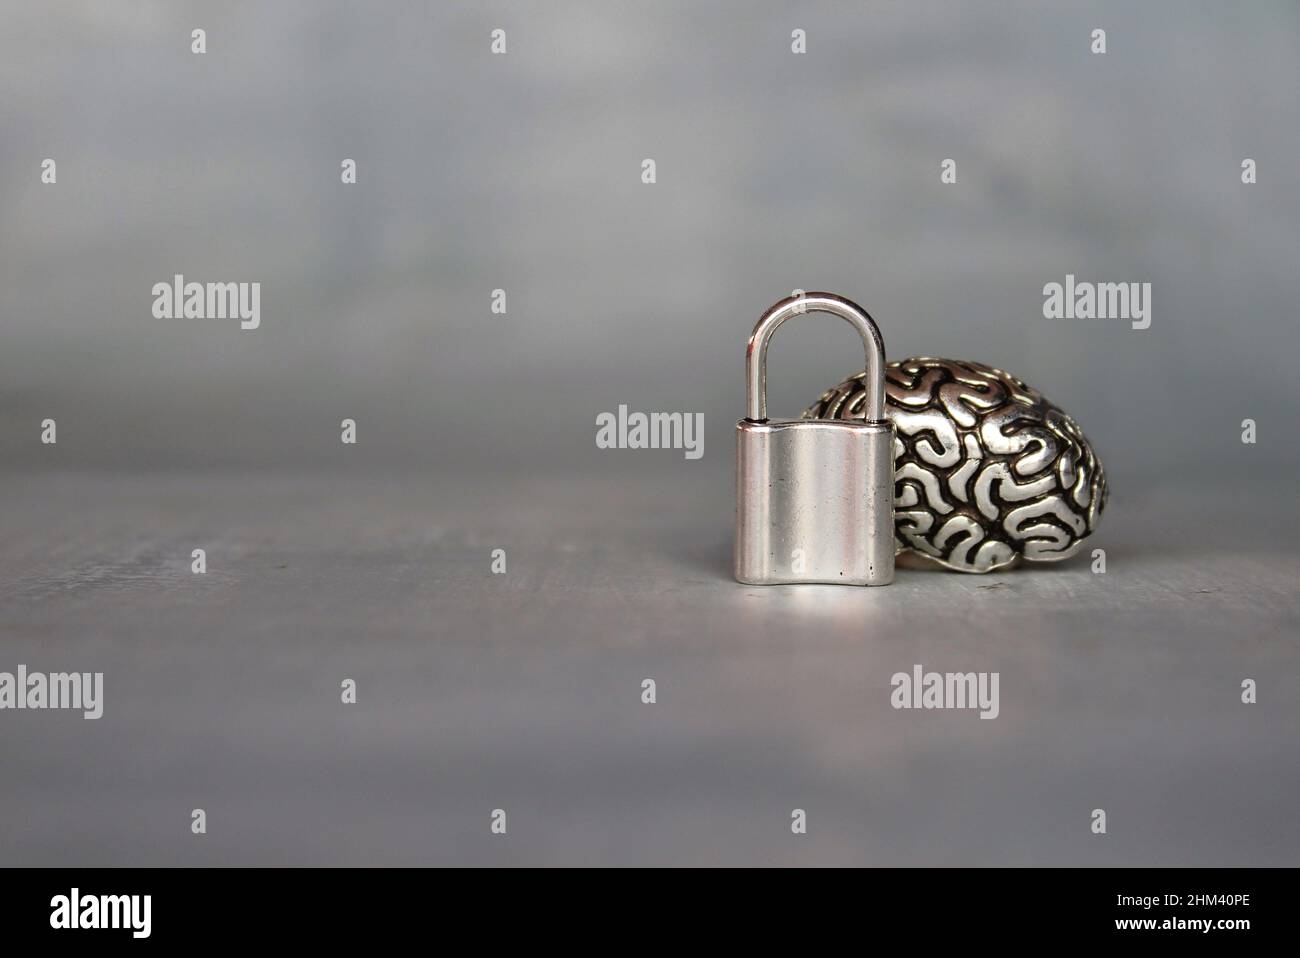 Brain model with a padlock. Copy space for text. Unlocking the brain's full potential concept. Stock Photo